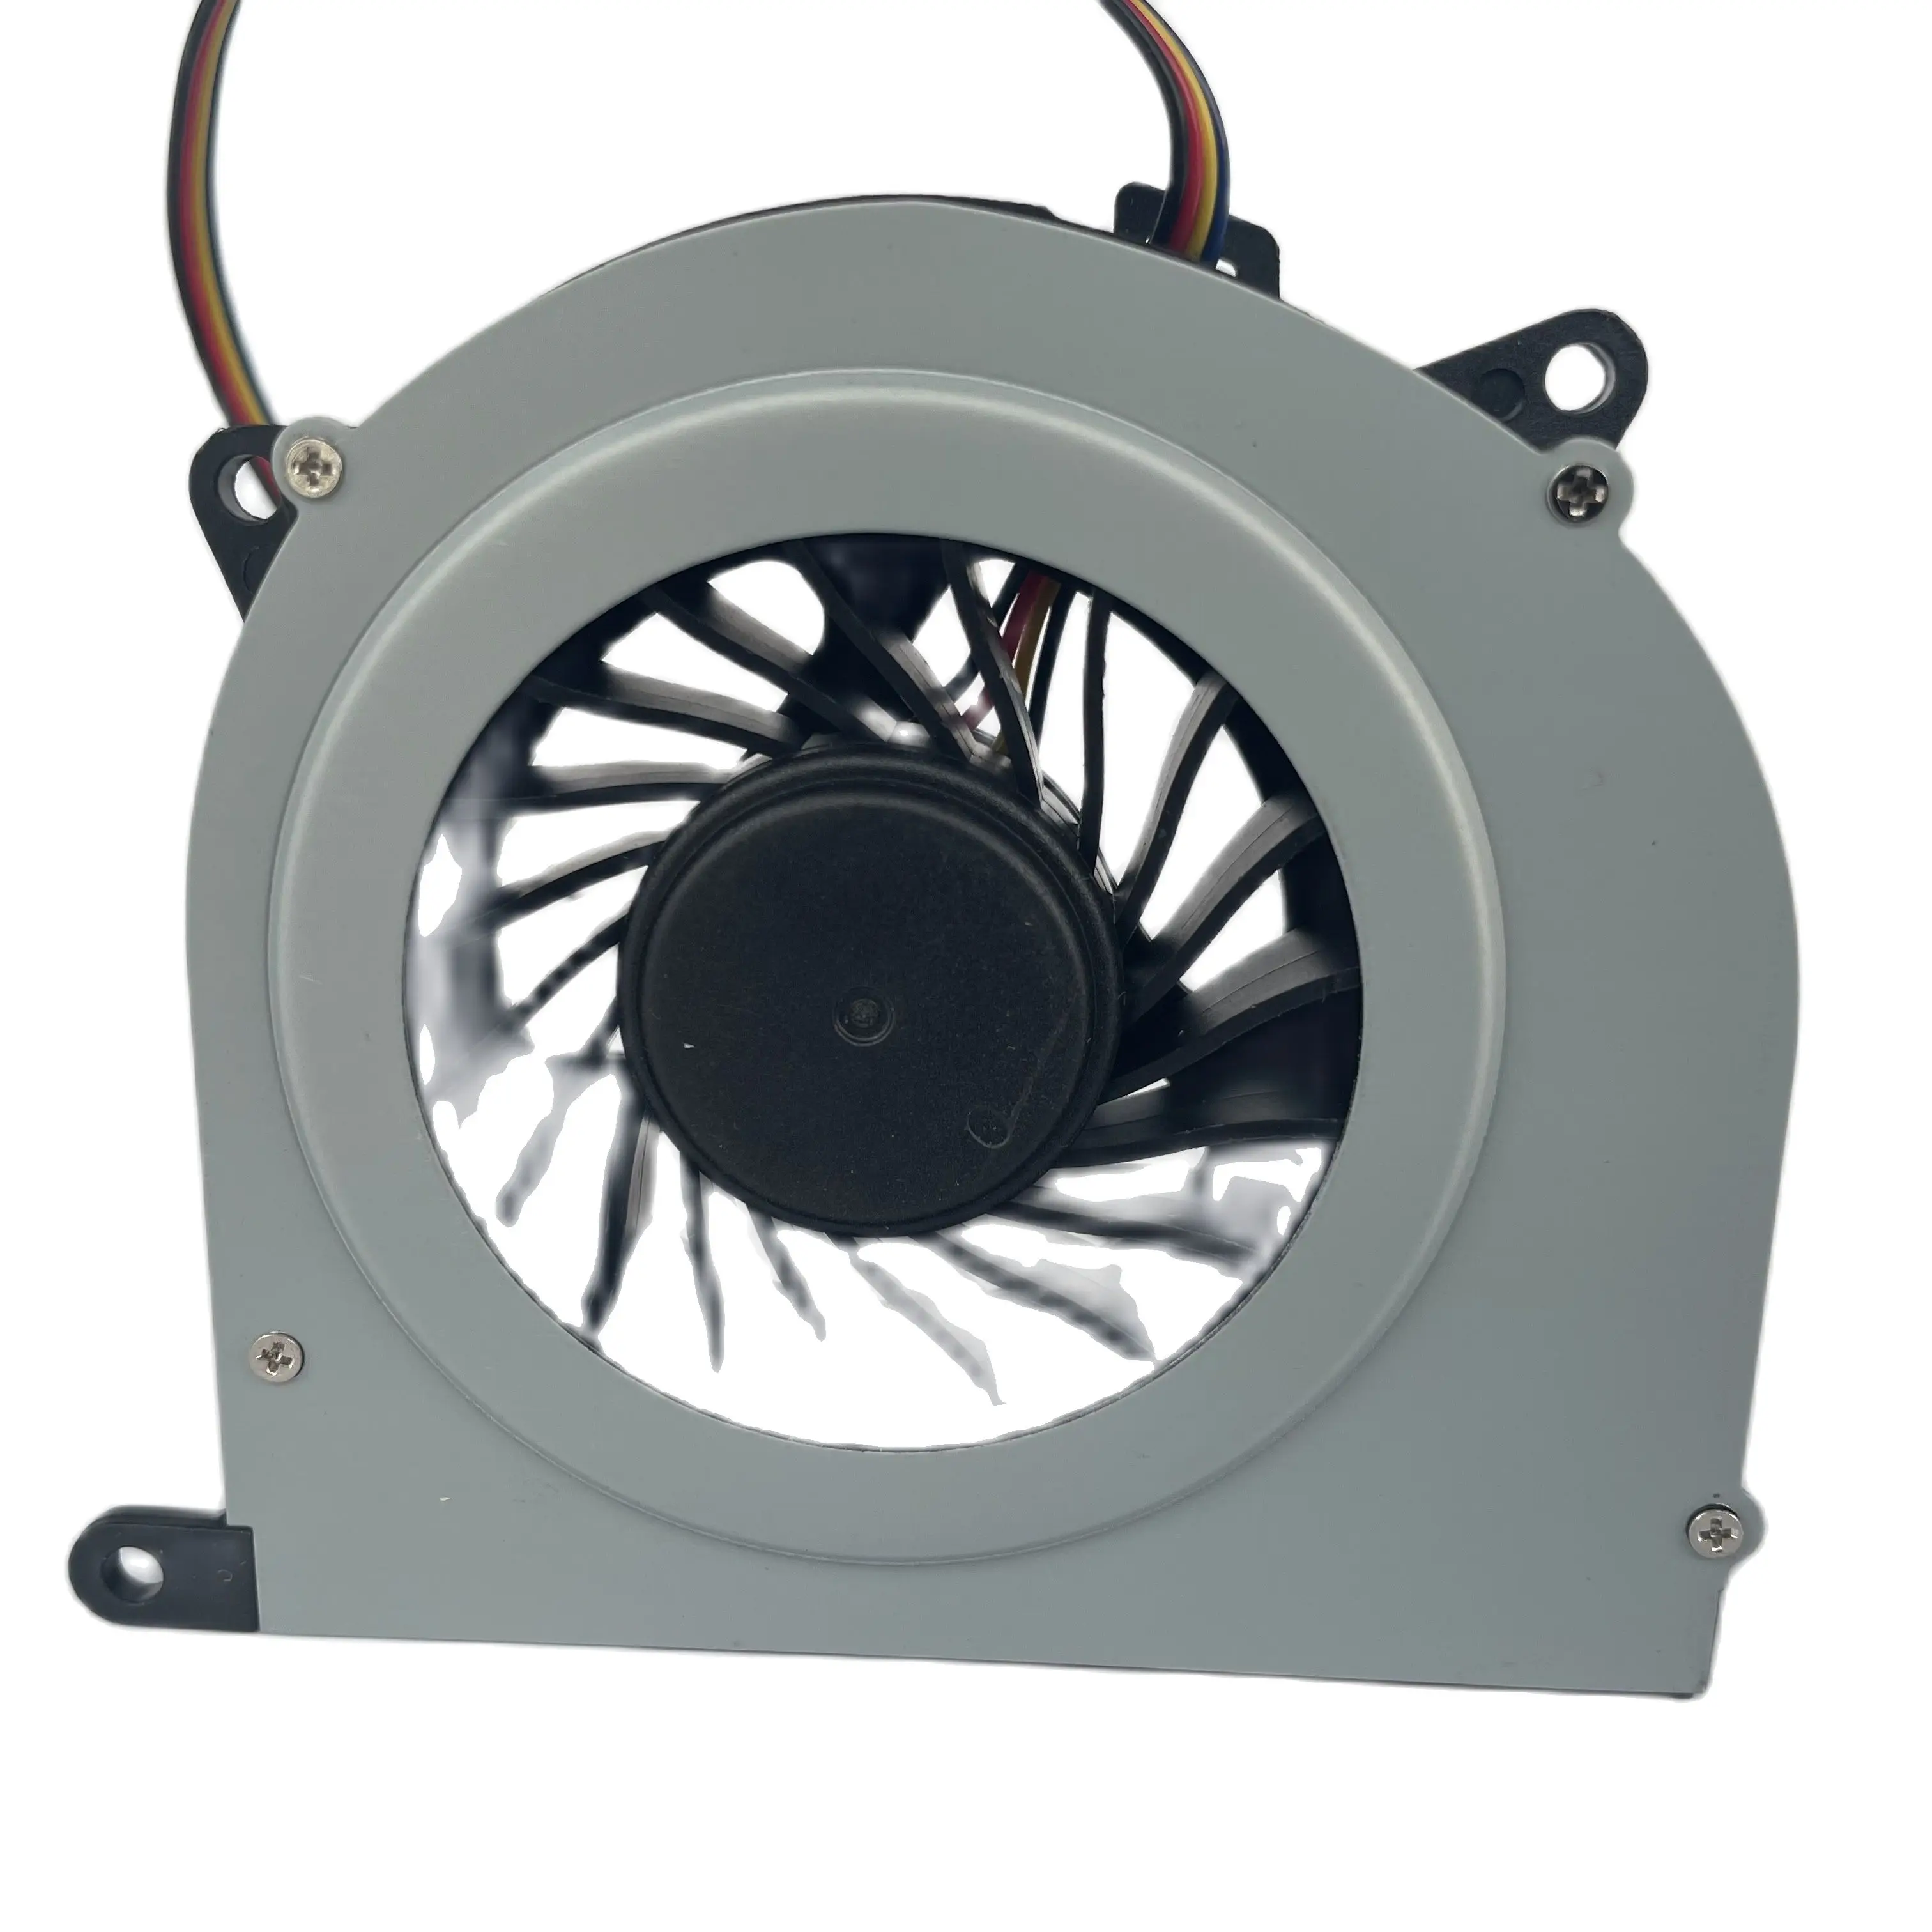 Newest Cooler products sell like hot cakes 7016 Notebook Computer Cooling Fan Heat dissipation artifact